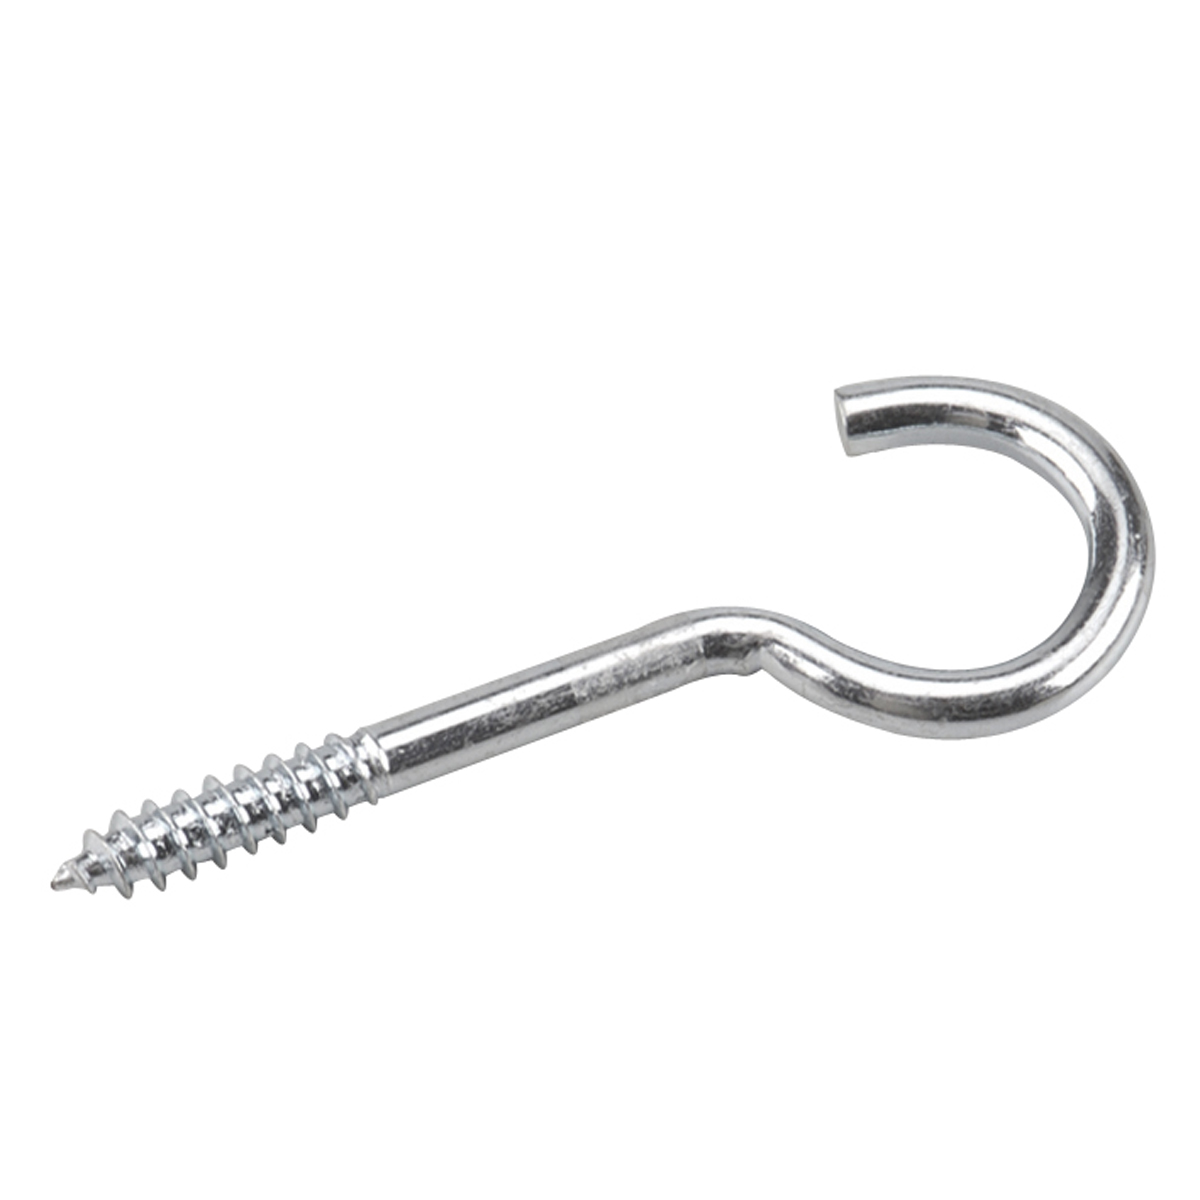 Screw Hook with Lag Thread  - 3/8-in x 4-7/8-in